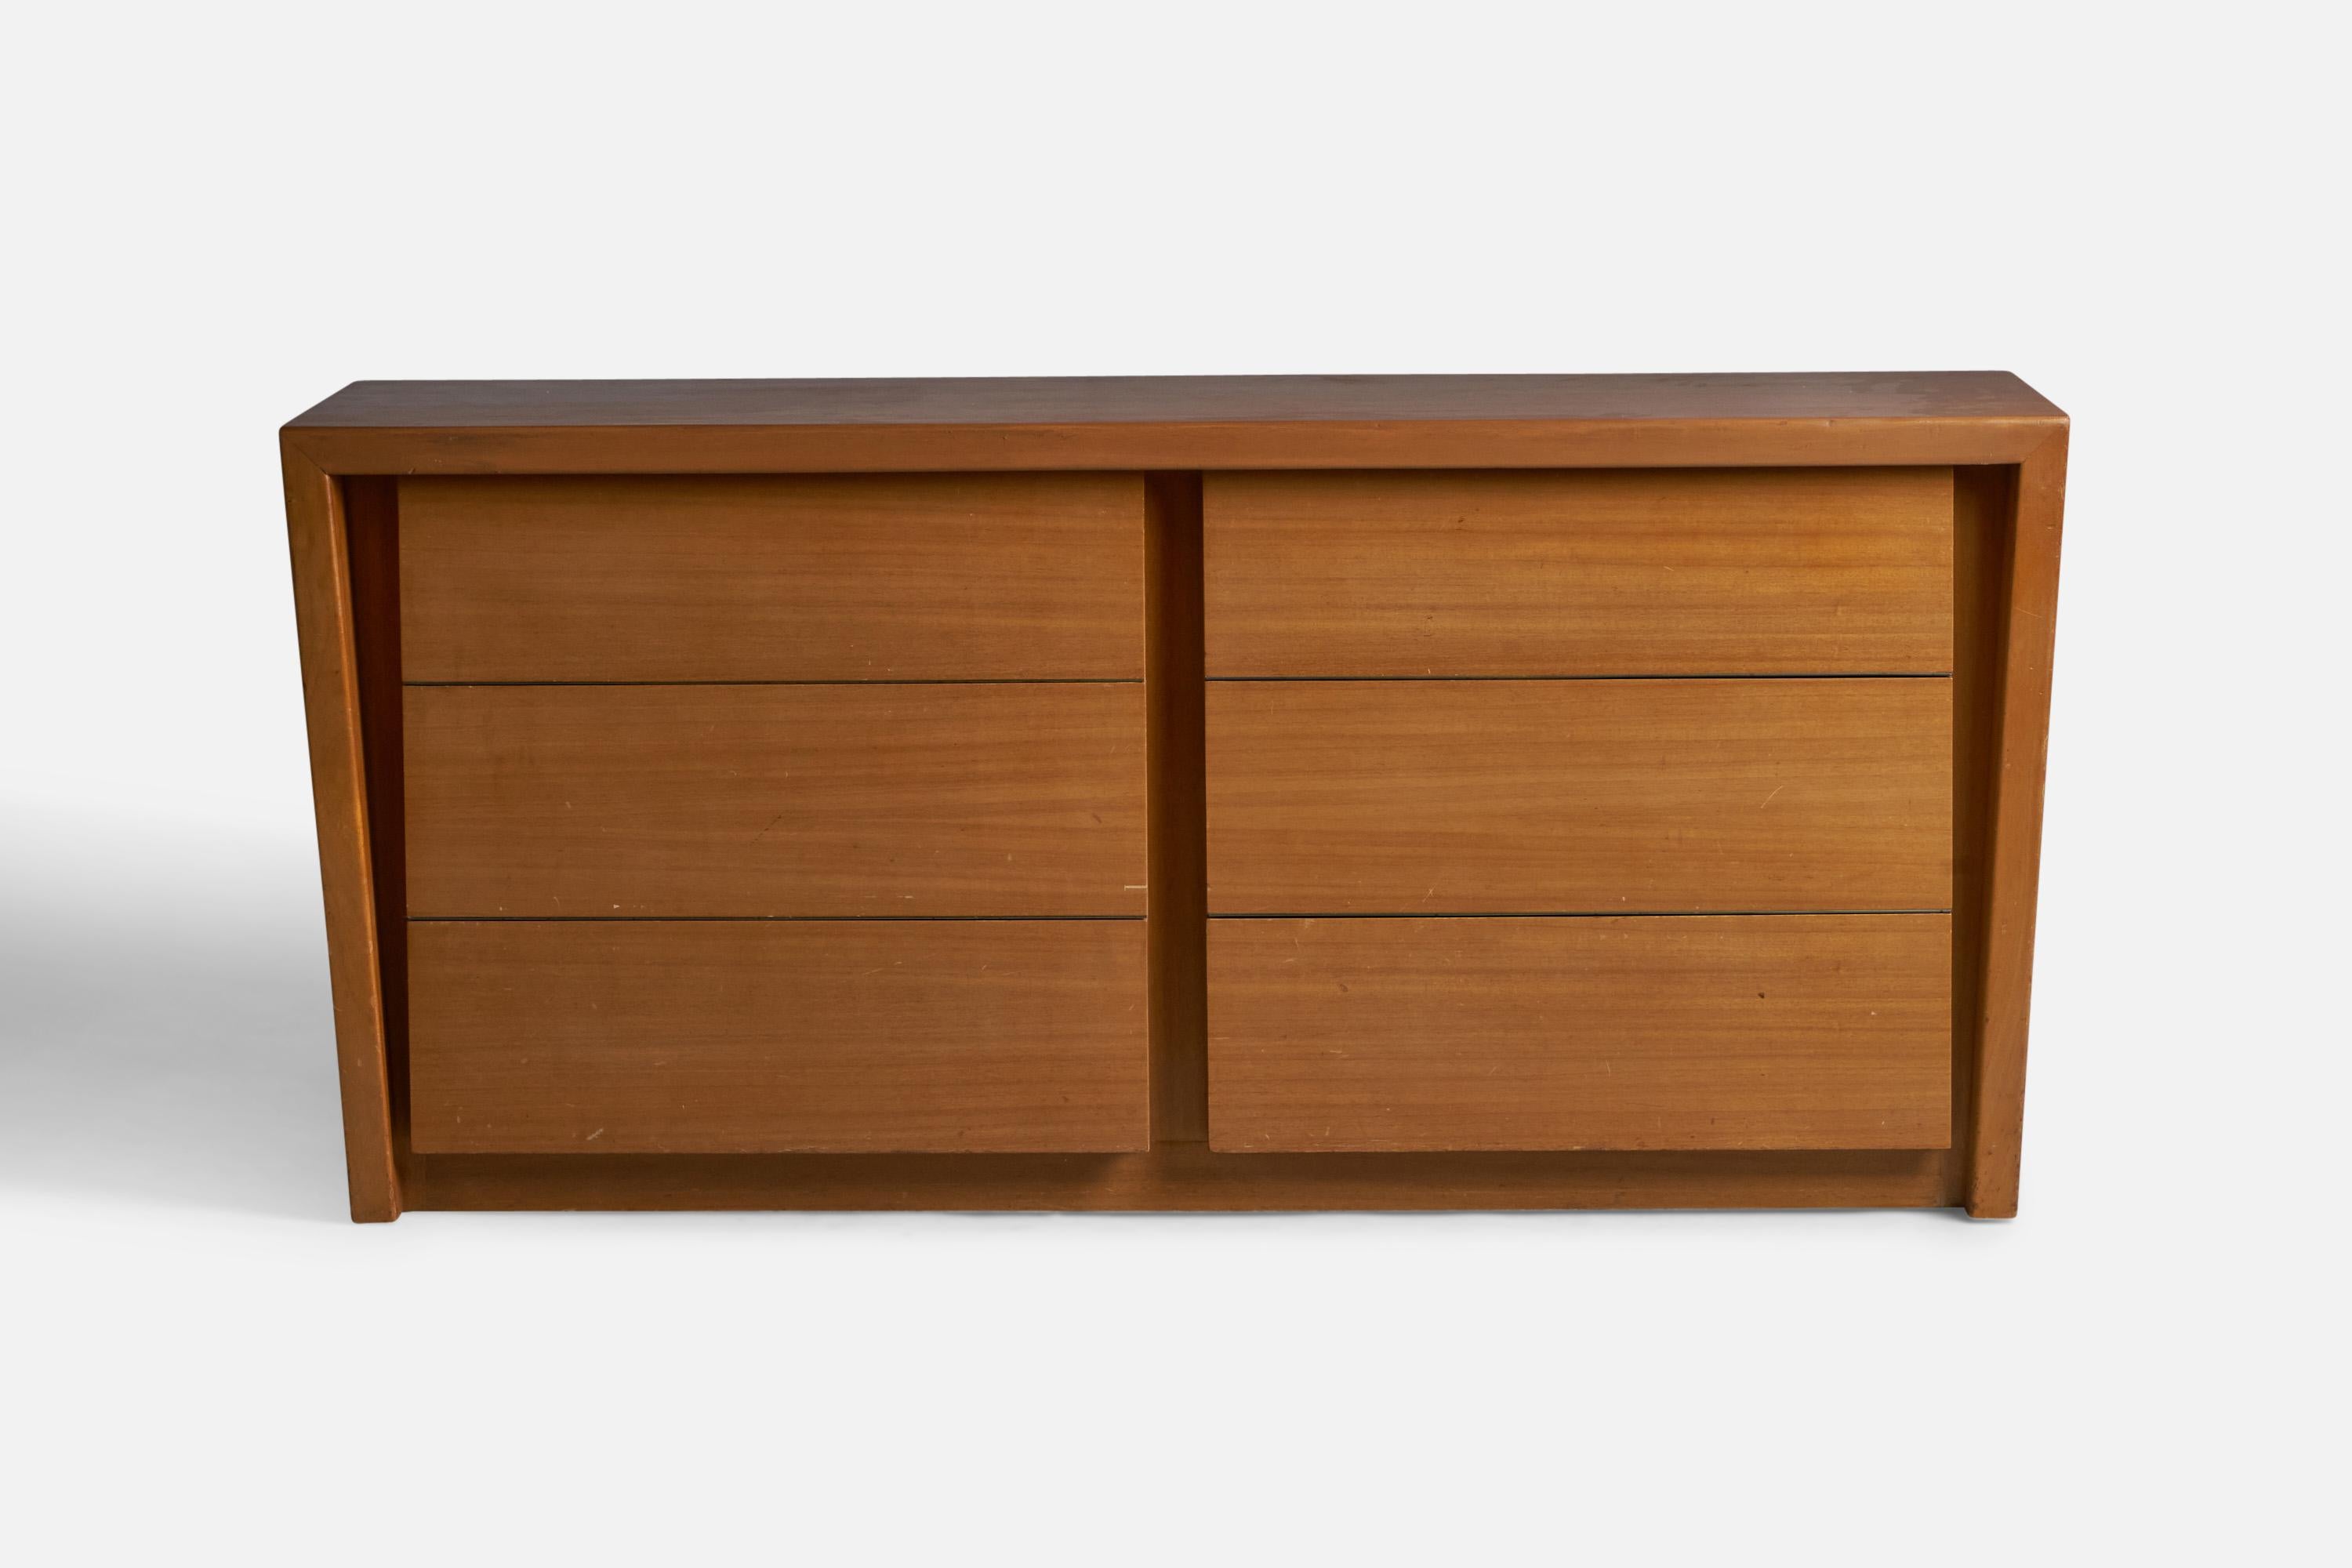 An oak dresser or chest of drawers, designed and produced in the US, 1950s.